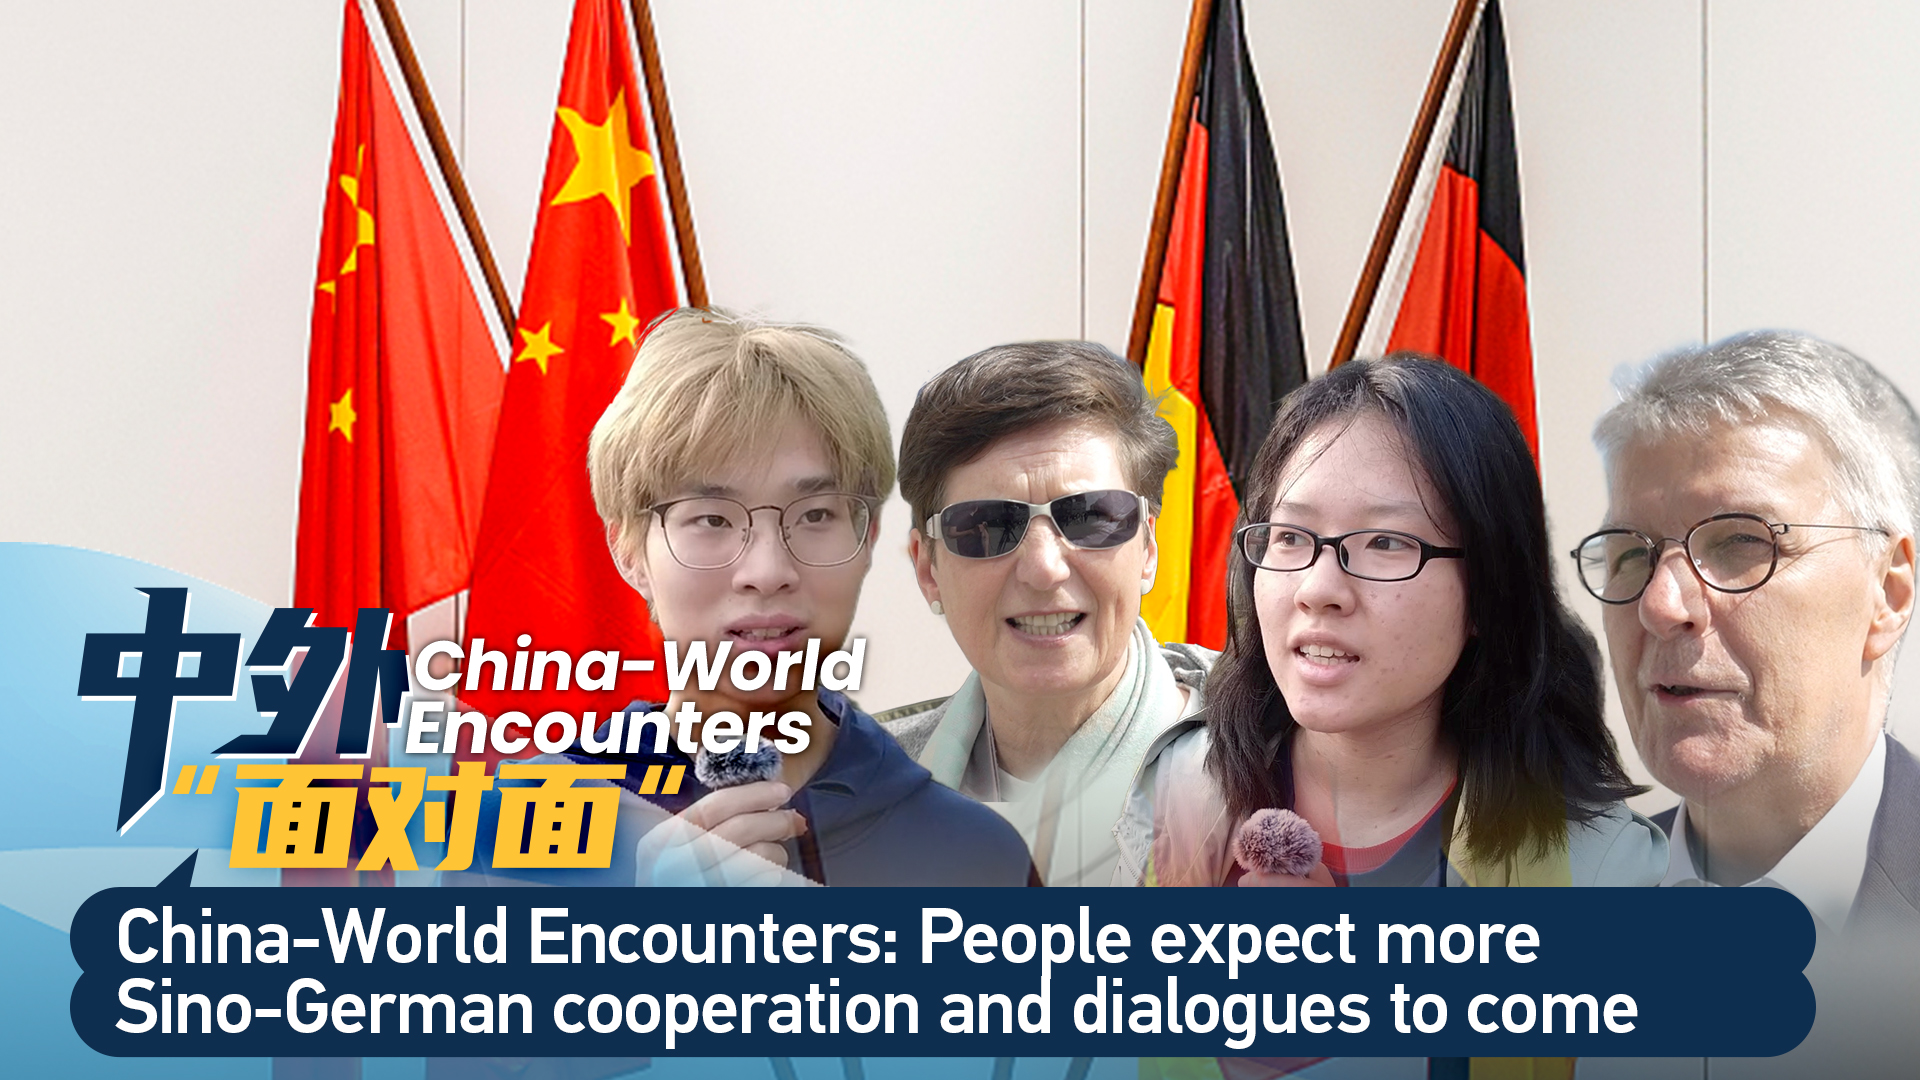 People expect more Sino-German cooperation and dialogues to come